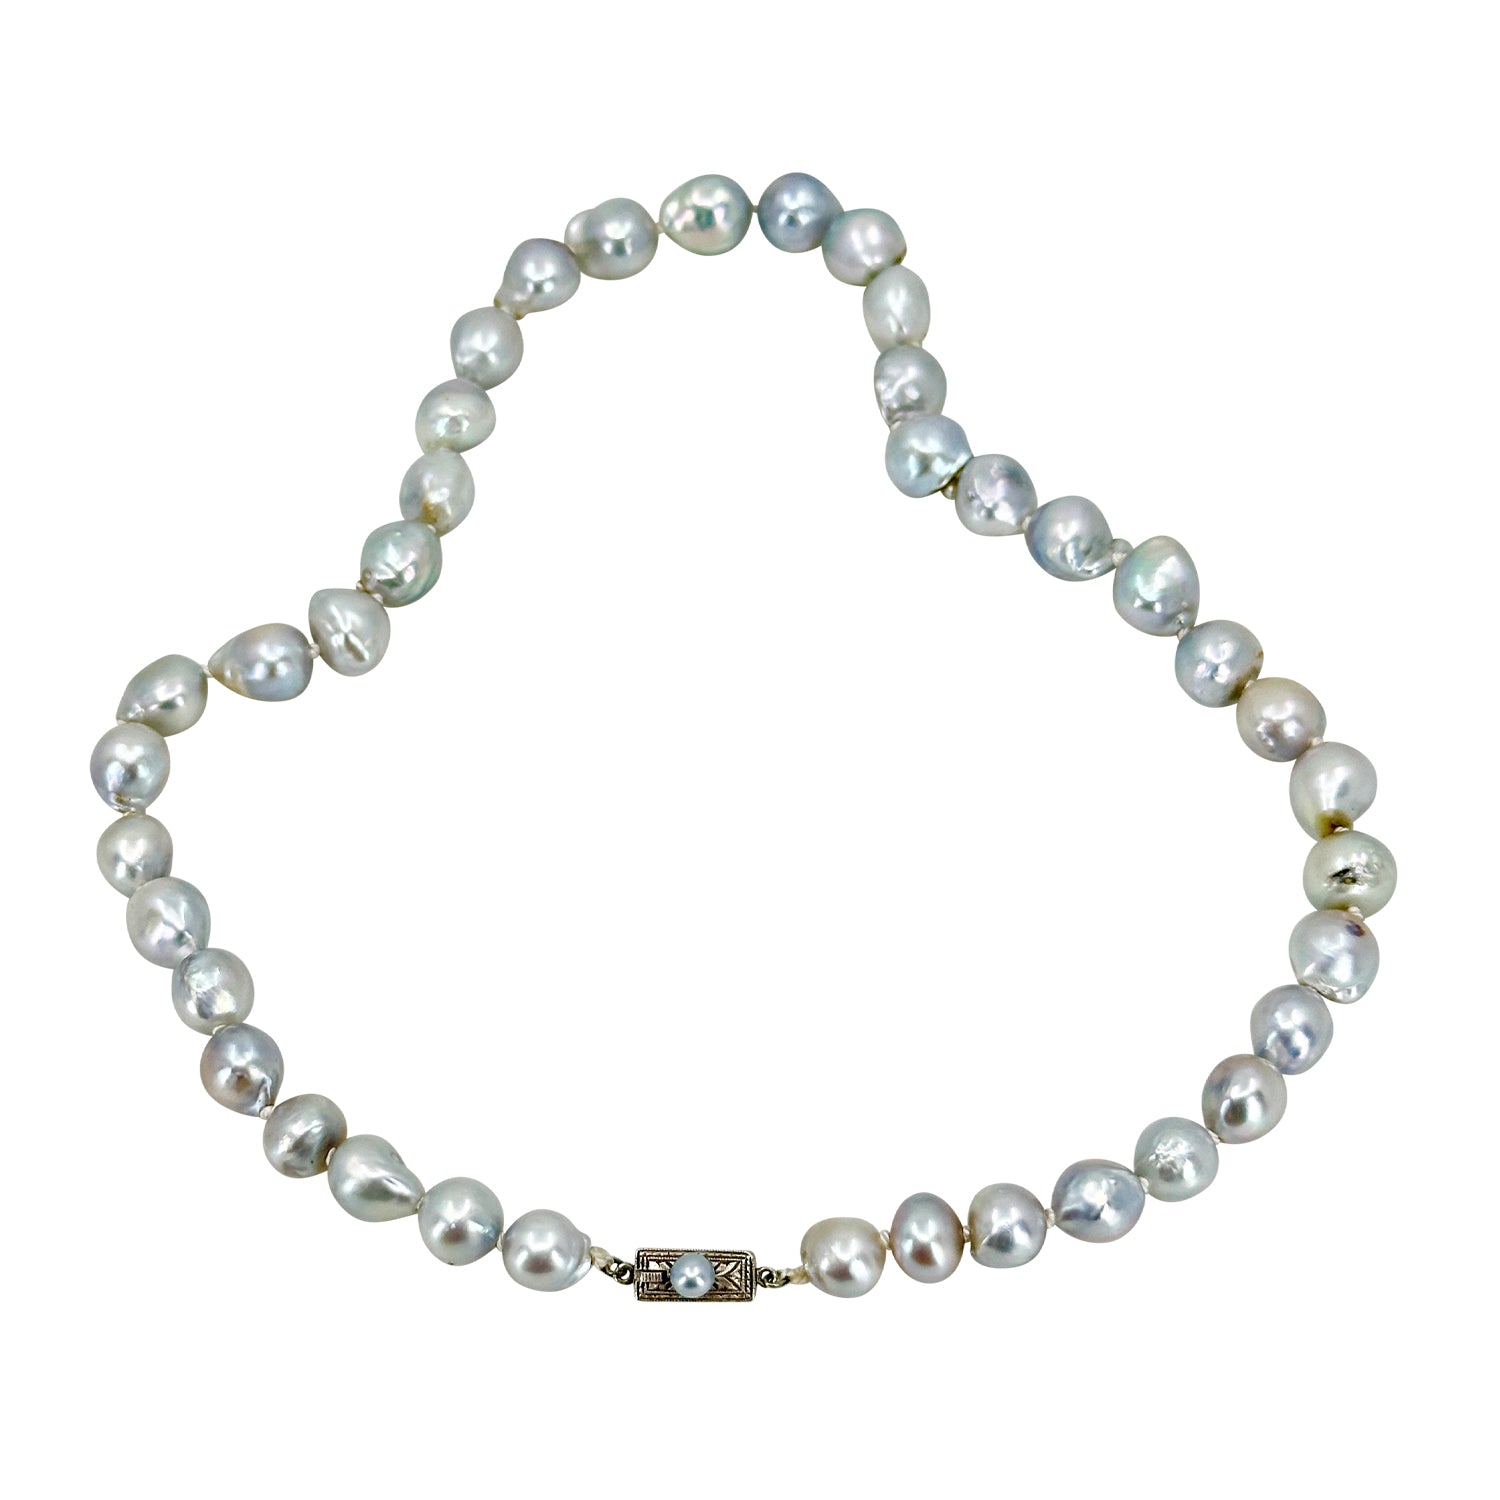 Old Baroque Silver Blue Mid Century Japanese Saltwater Cultured Akoya Pearl Vintage Necklace - Sterling Silver 17 Inch